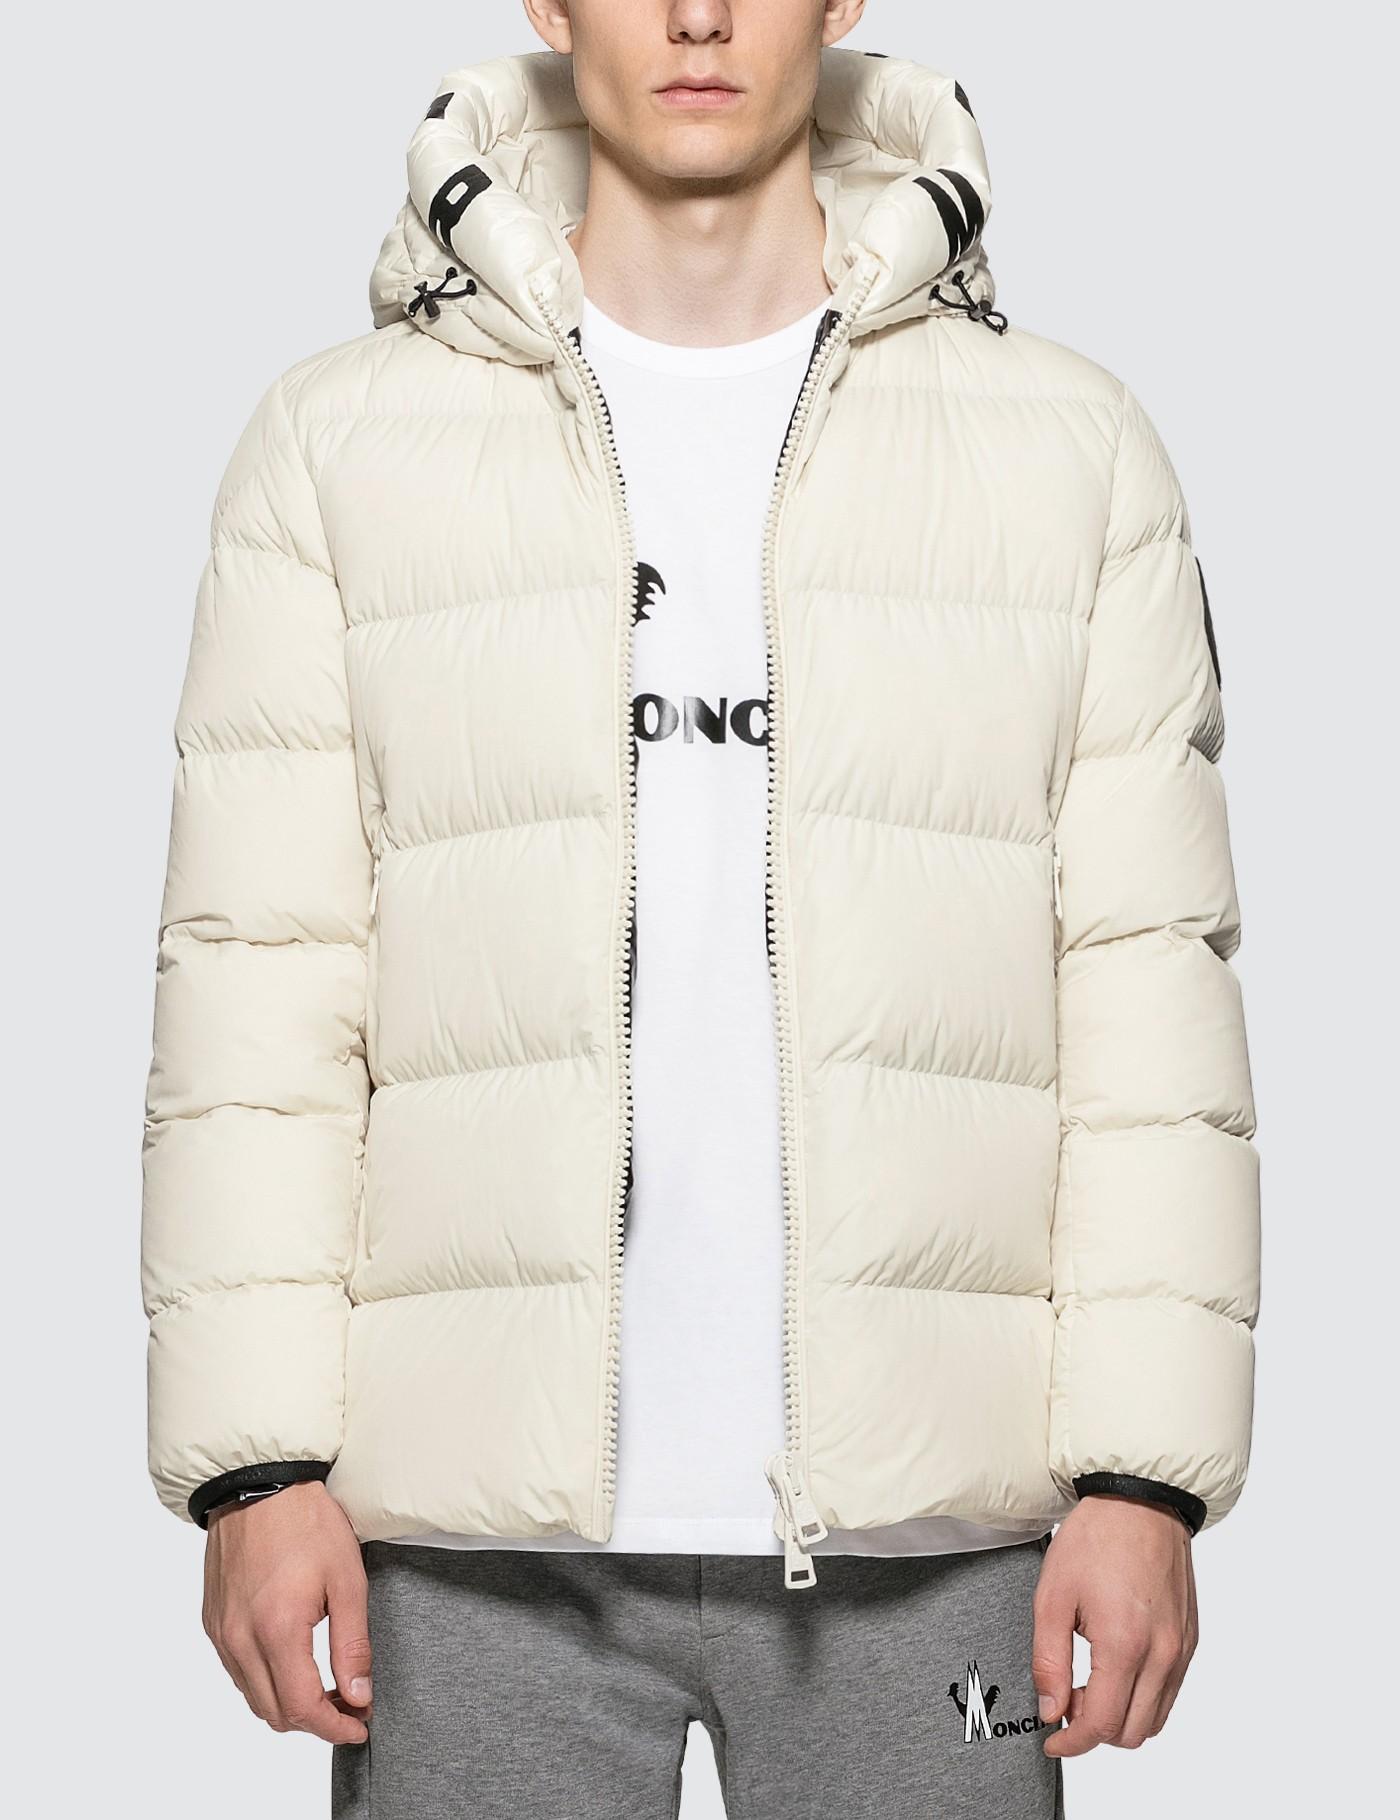 Moncler Synthetic Nylon Down Jacket With Logo Hood in White for Men - Lyst